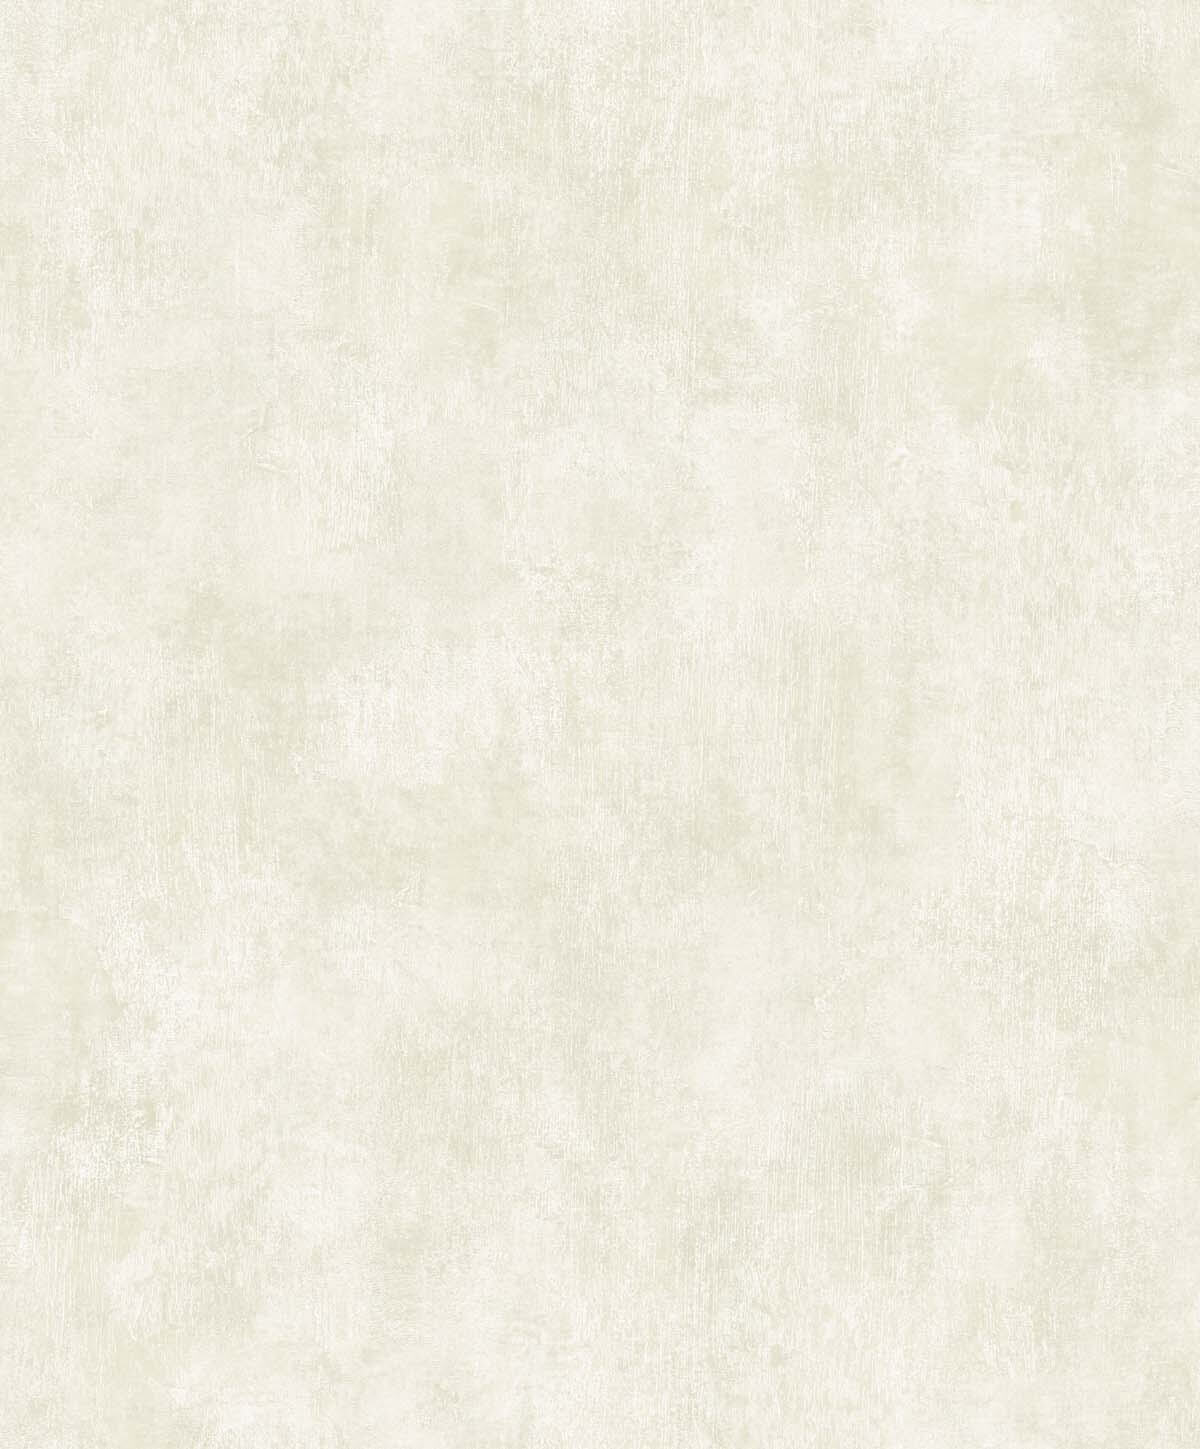 White Heron Claire Faux Suede Wallpaper - Warm Pearl